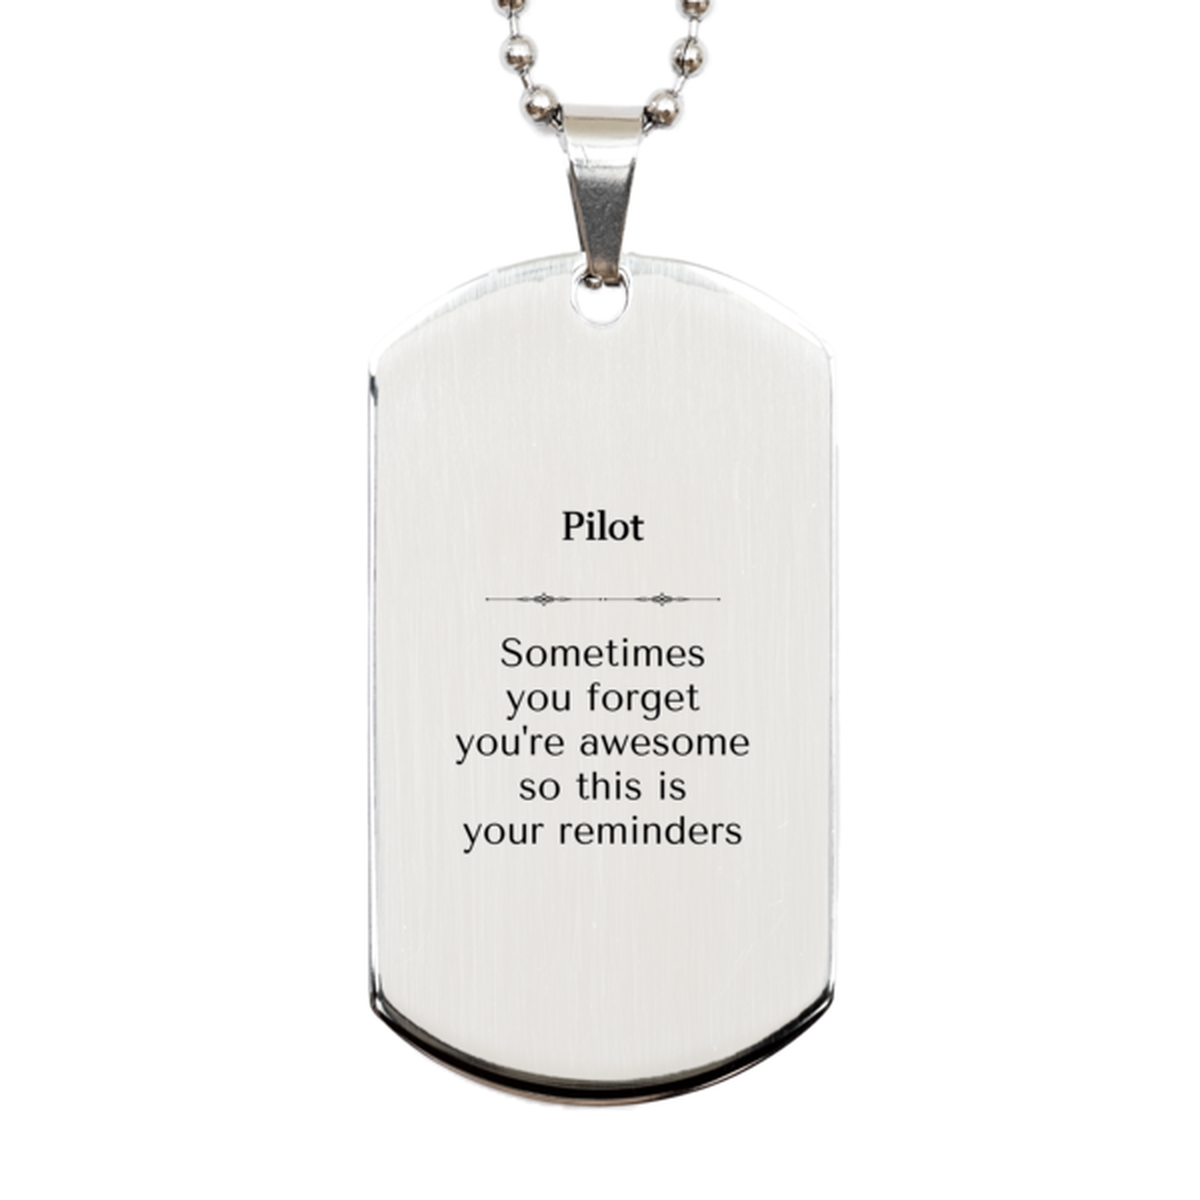 Sentimental Pilot Silver Dog Tag, Pilot Sometimes you forget you're awesome so this is your reminders, Graduation Christmas Birthday Gifts for Pilot, Men, Women, Coworkers